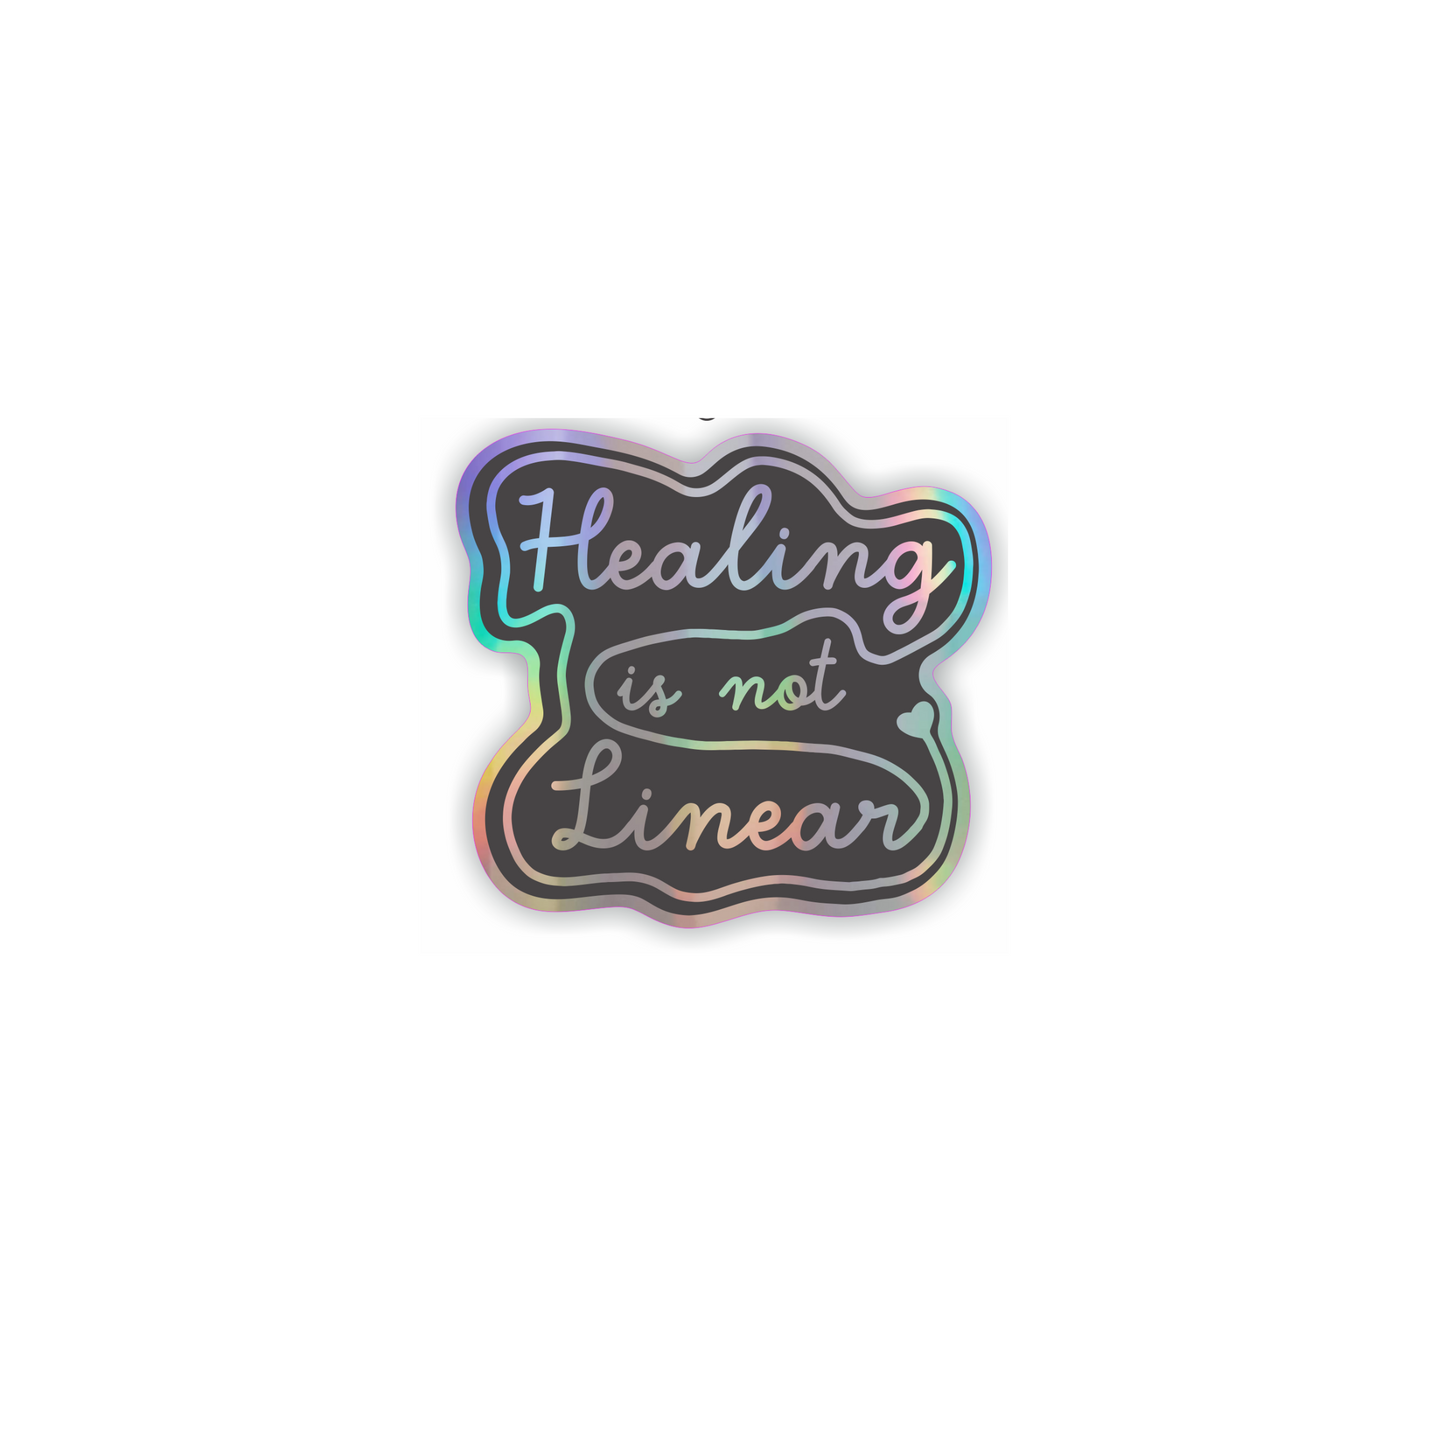 Healing is not linear holographic vinyl sticker